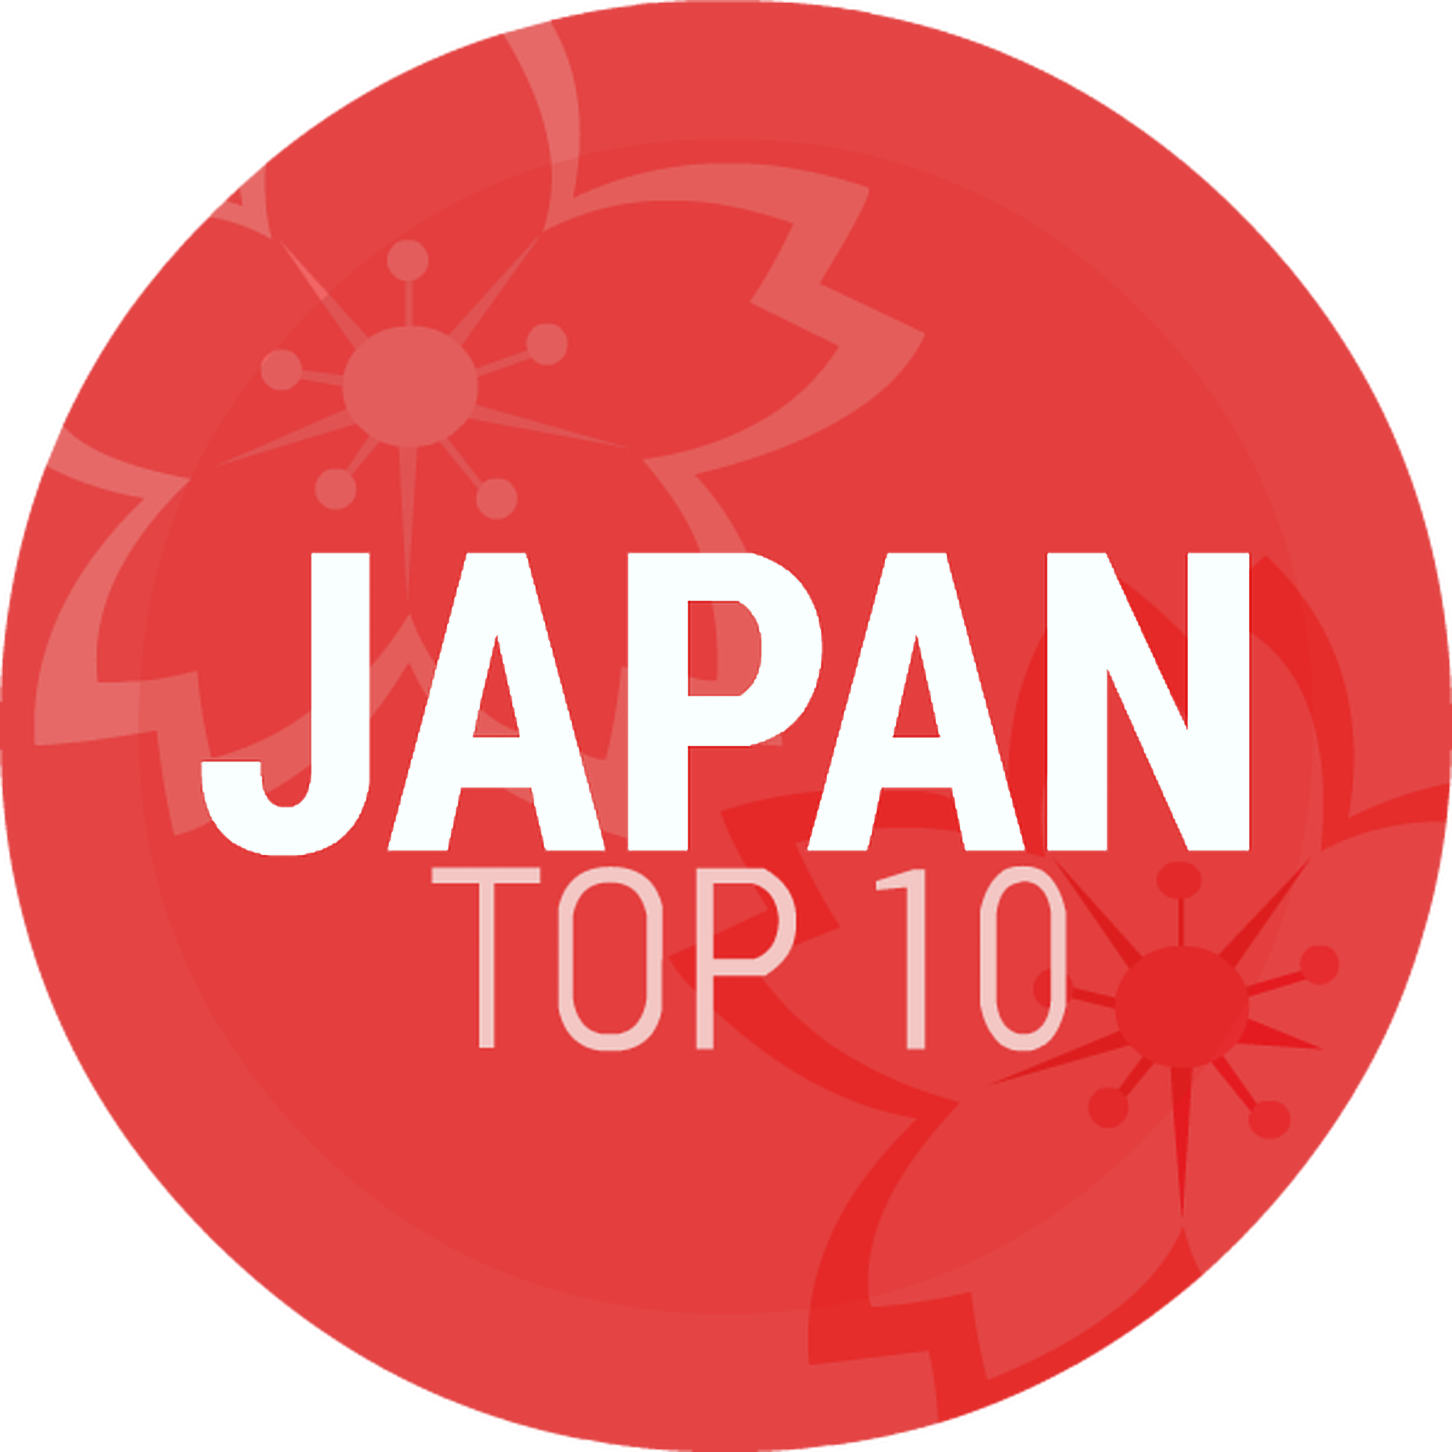 Episode 271 - Japan Top 10 Cultures #3 - Japanese Candy Food Drink